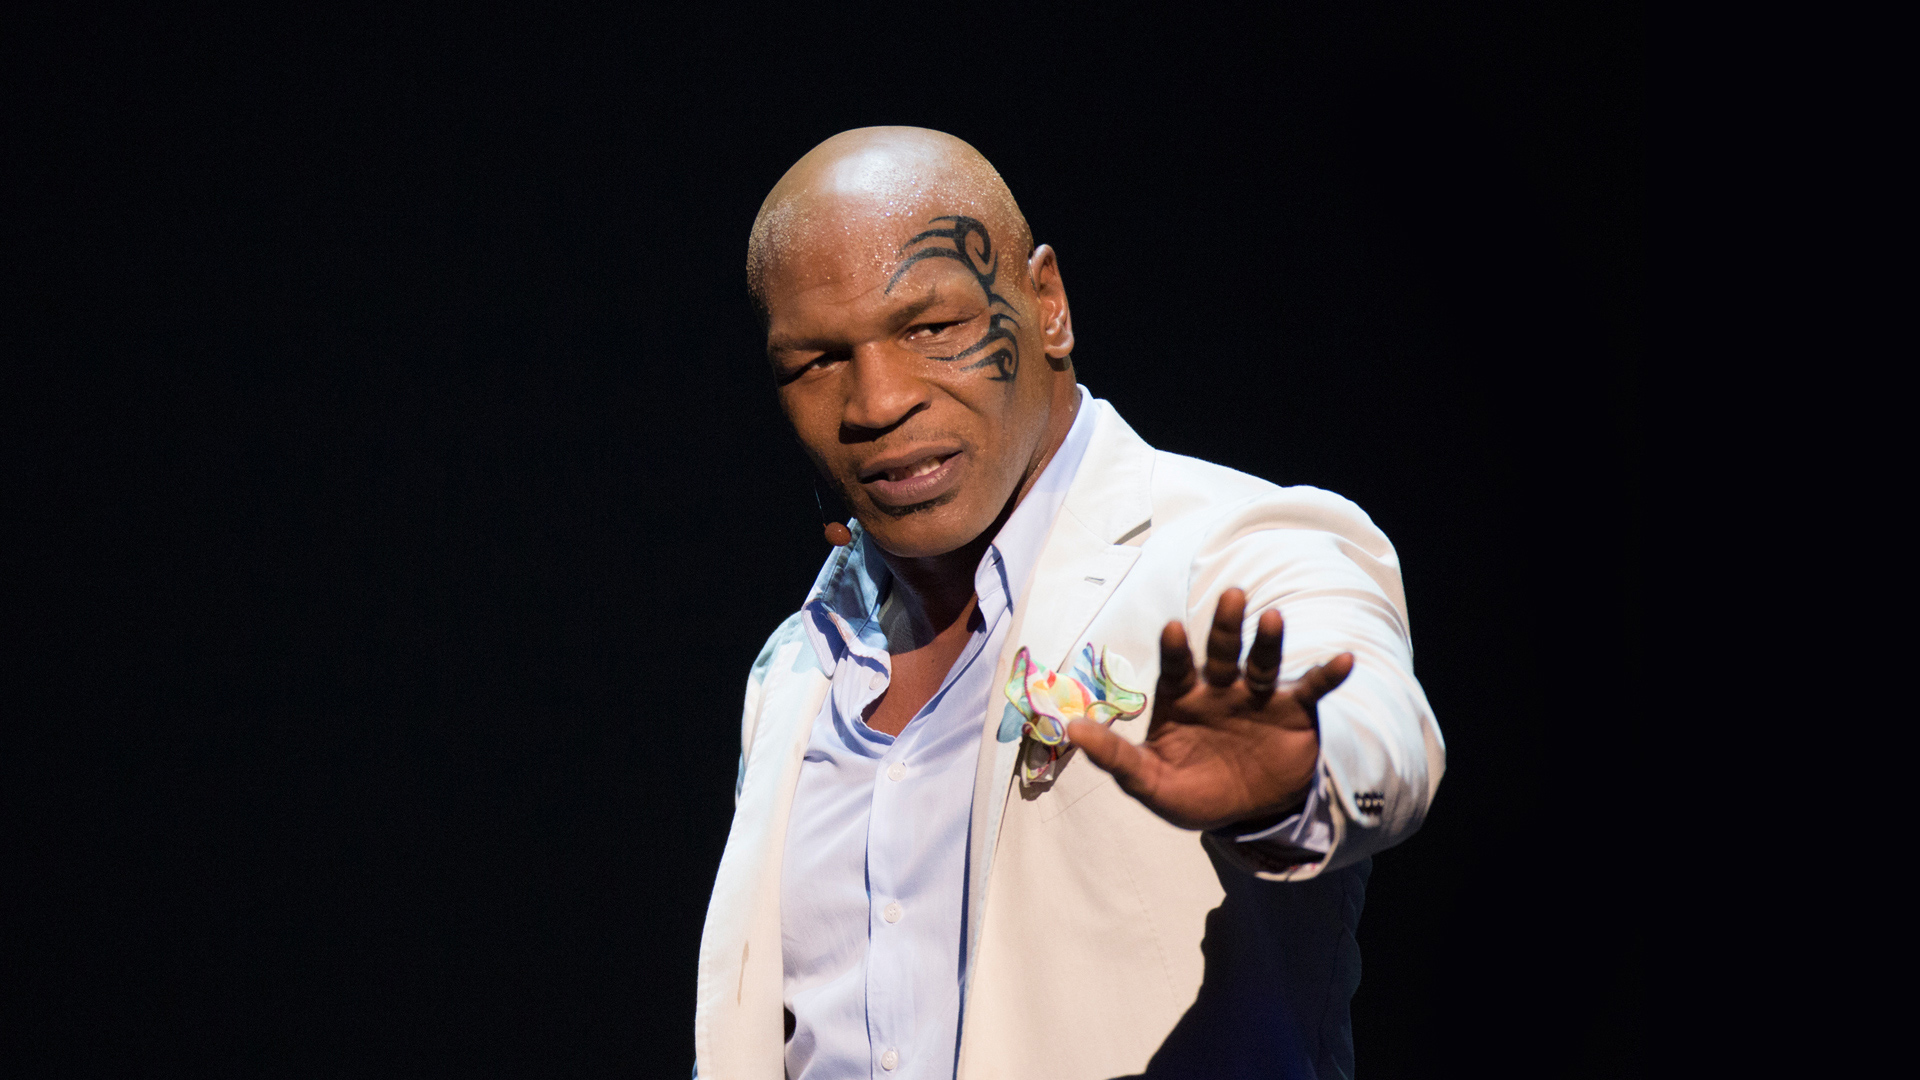 Mike Tyson Wallpaper - Mike Tyson Undisputed Truth Show , HD Wallpaper & Backgrounds